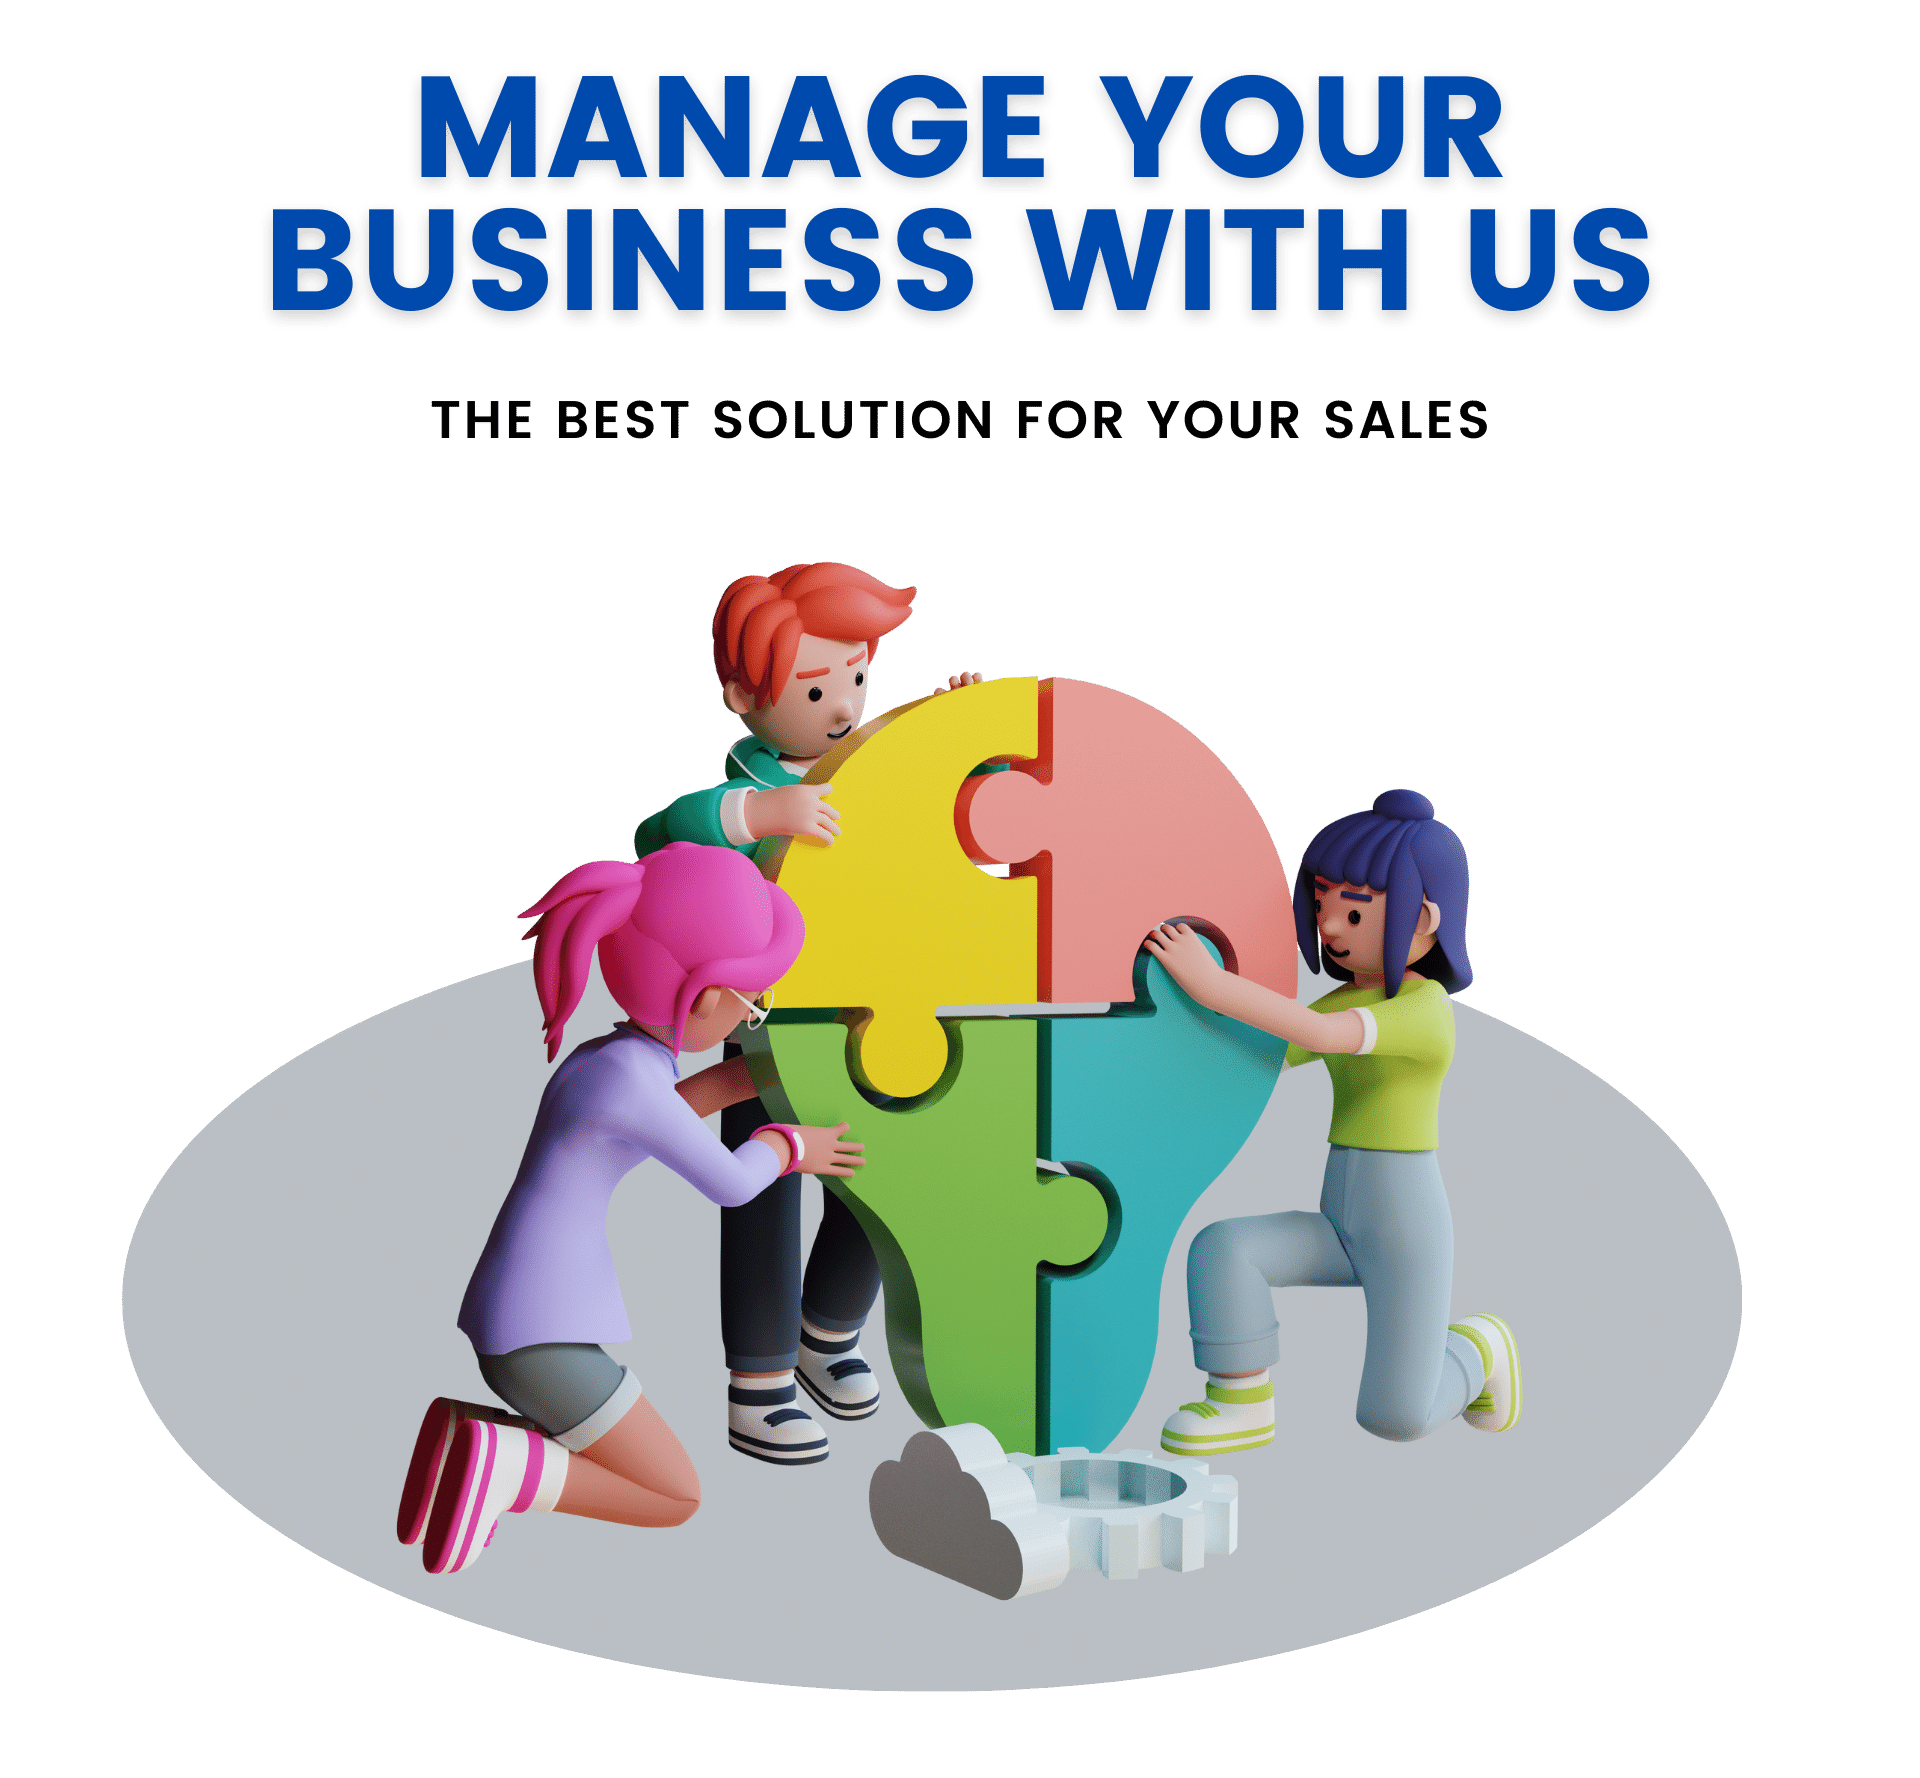 Manage your business with us at adii digital